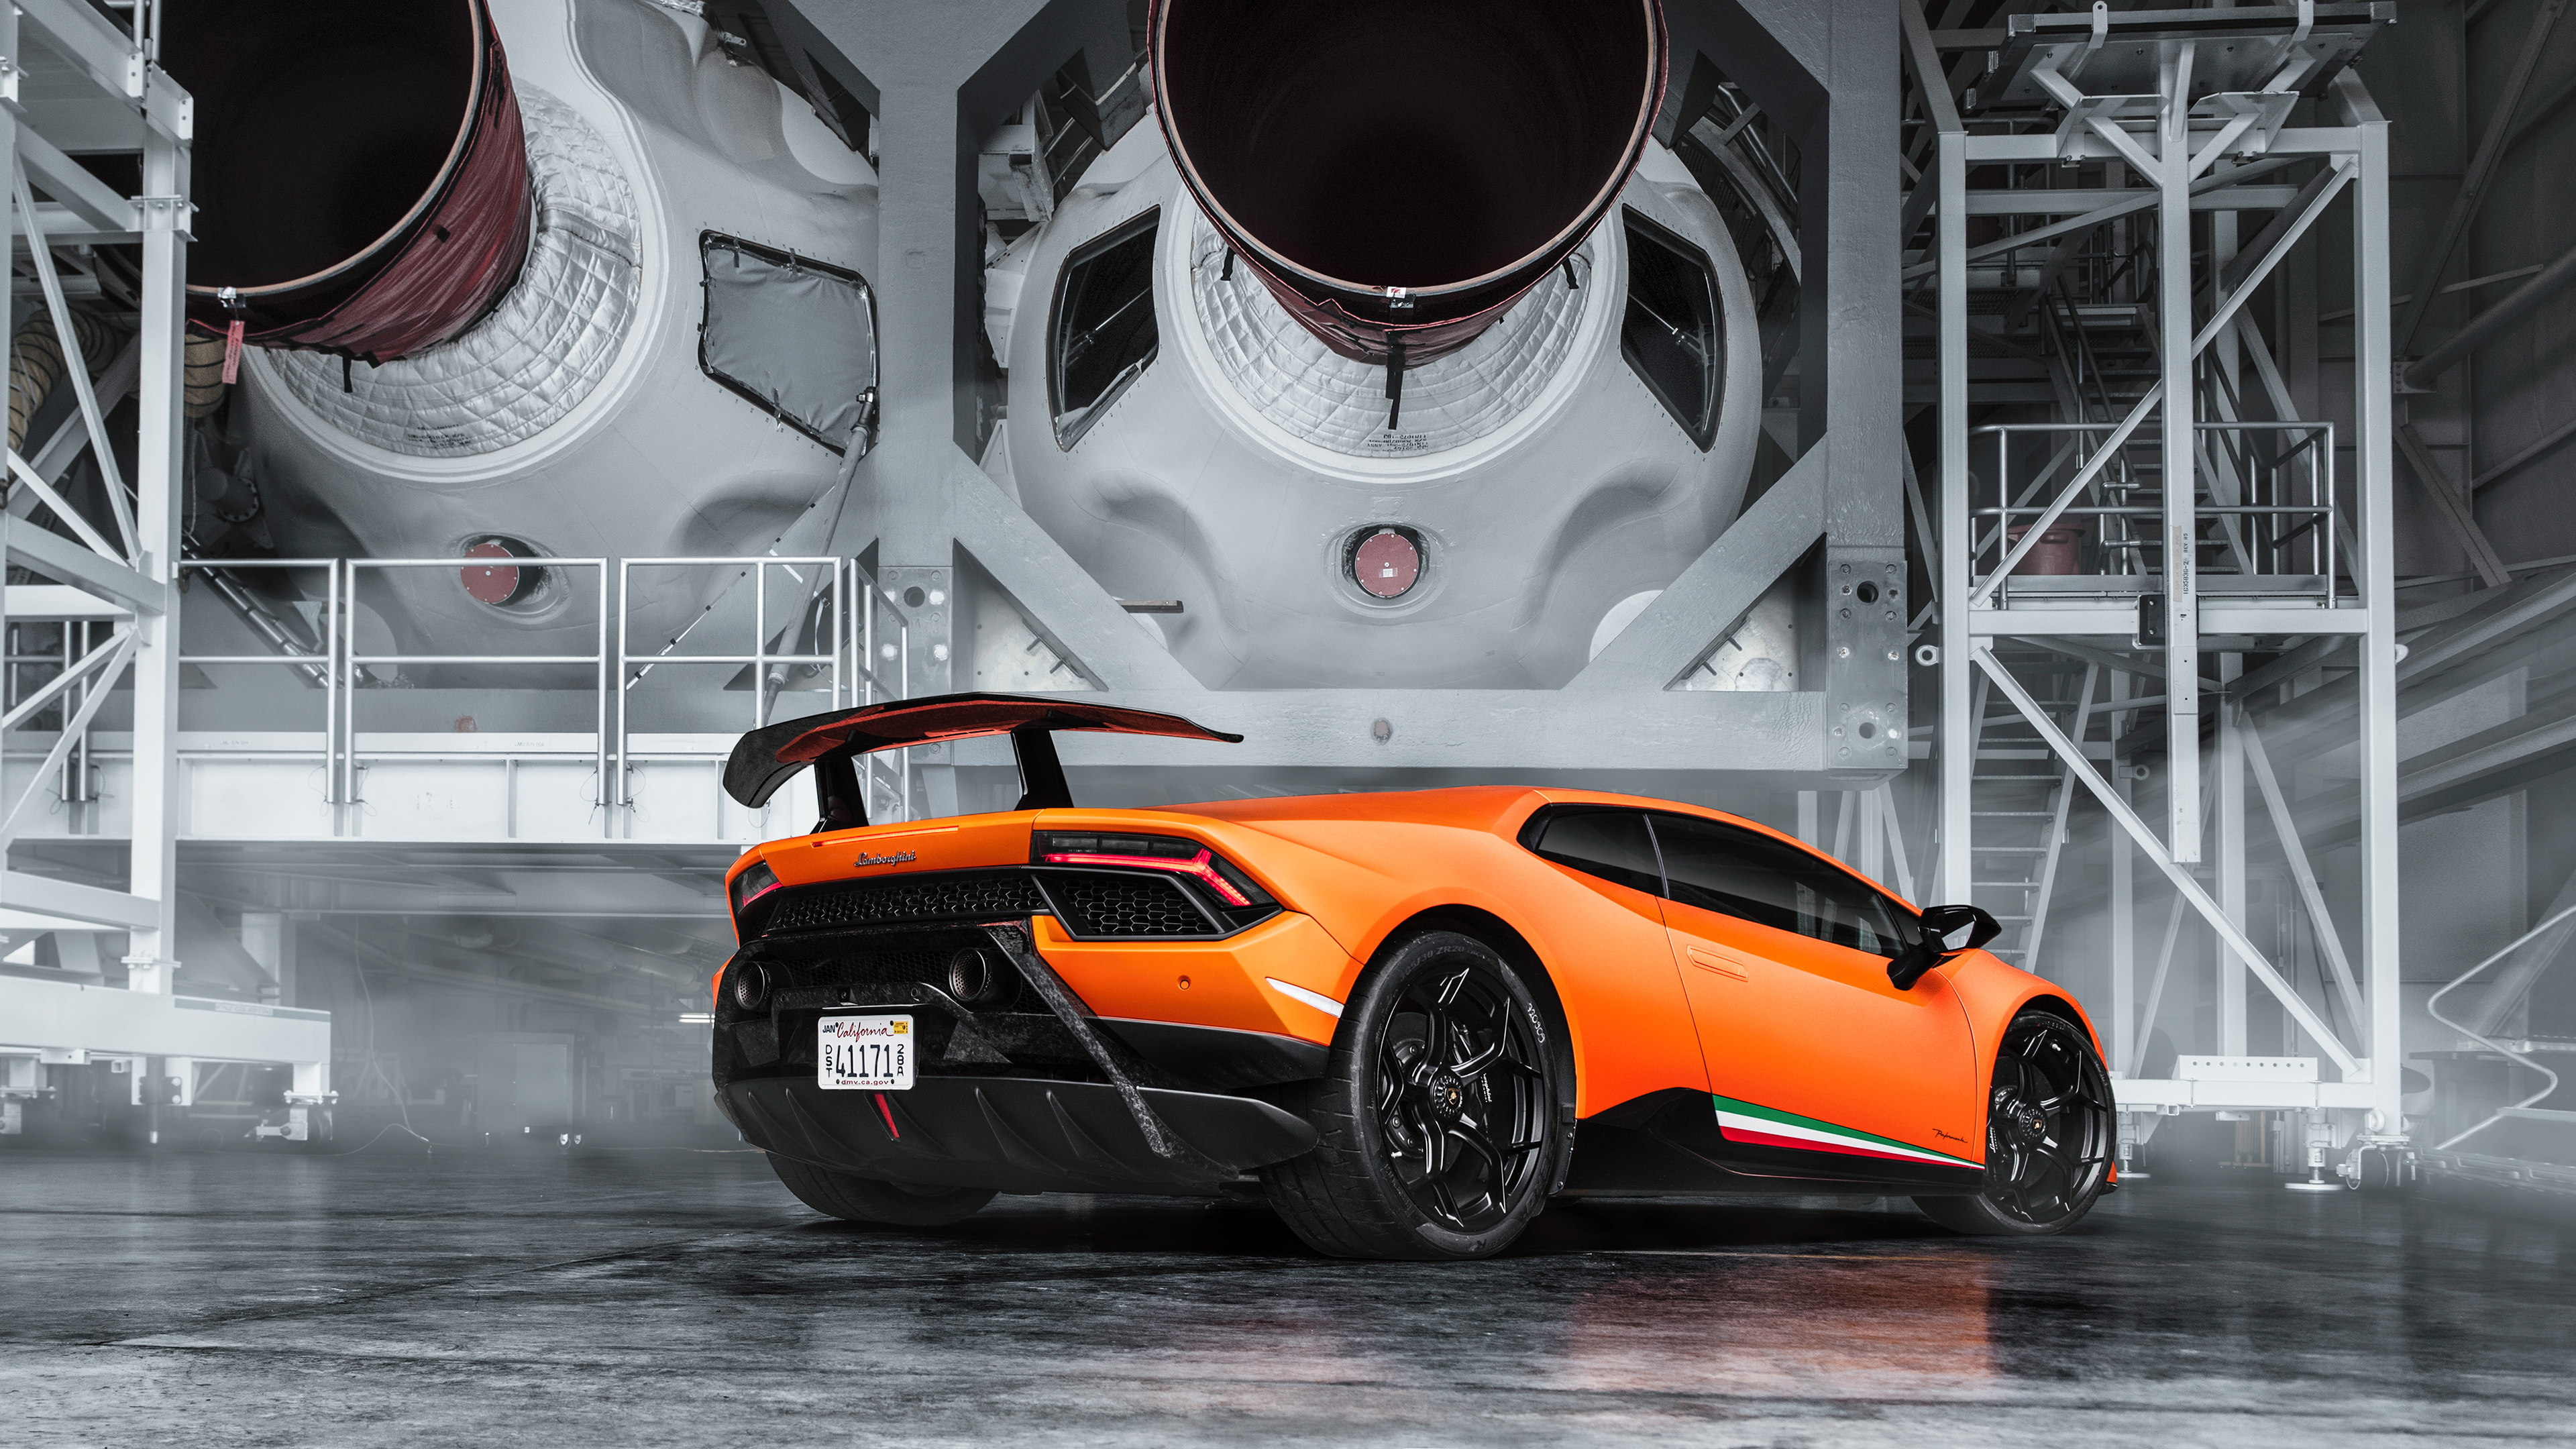 Lamborghini Huracan In Front Of Rocket Engines by Brandon Lim